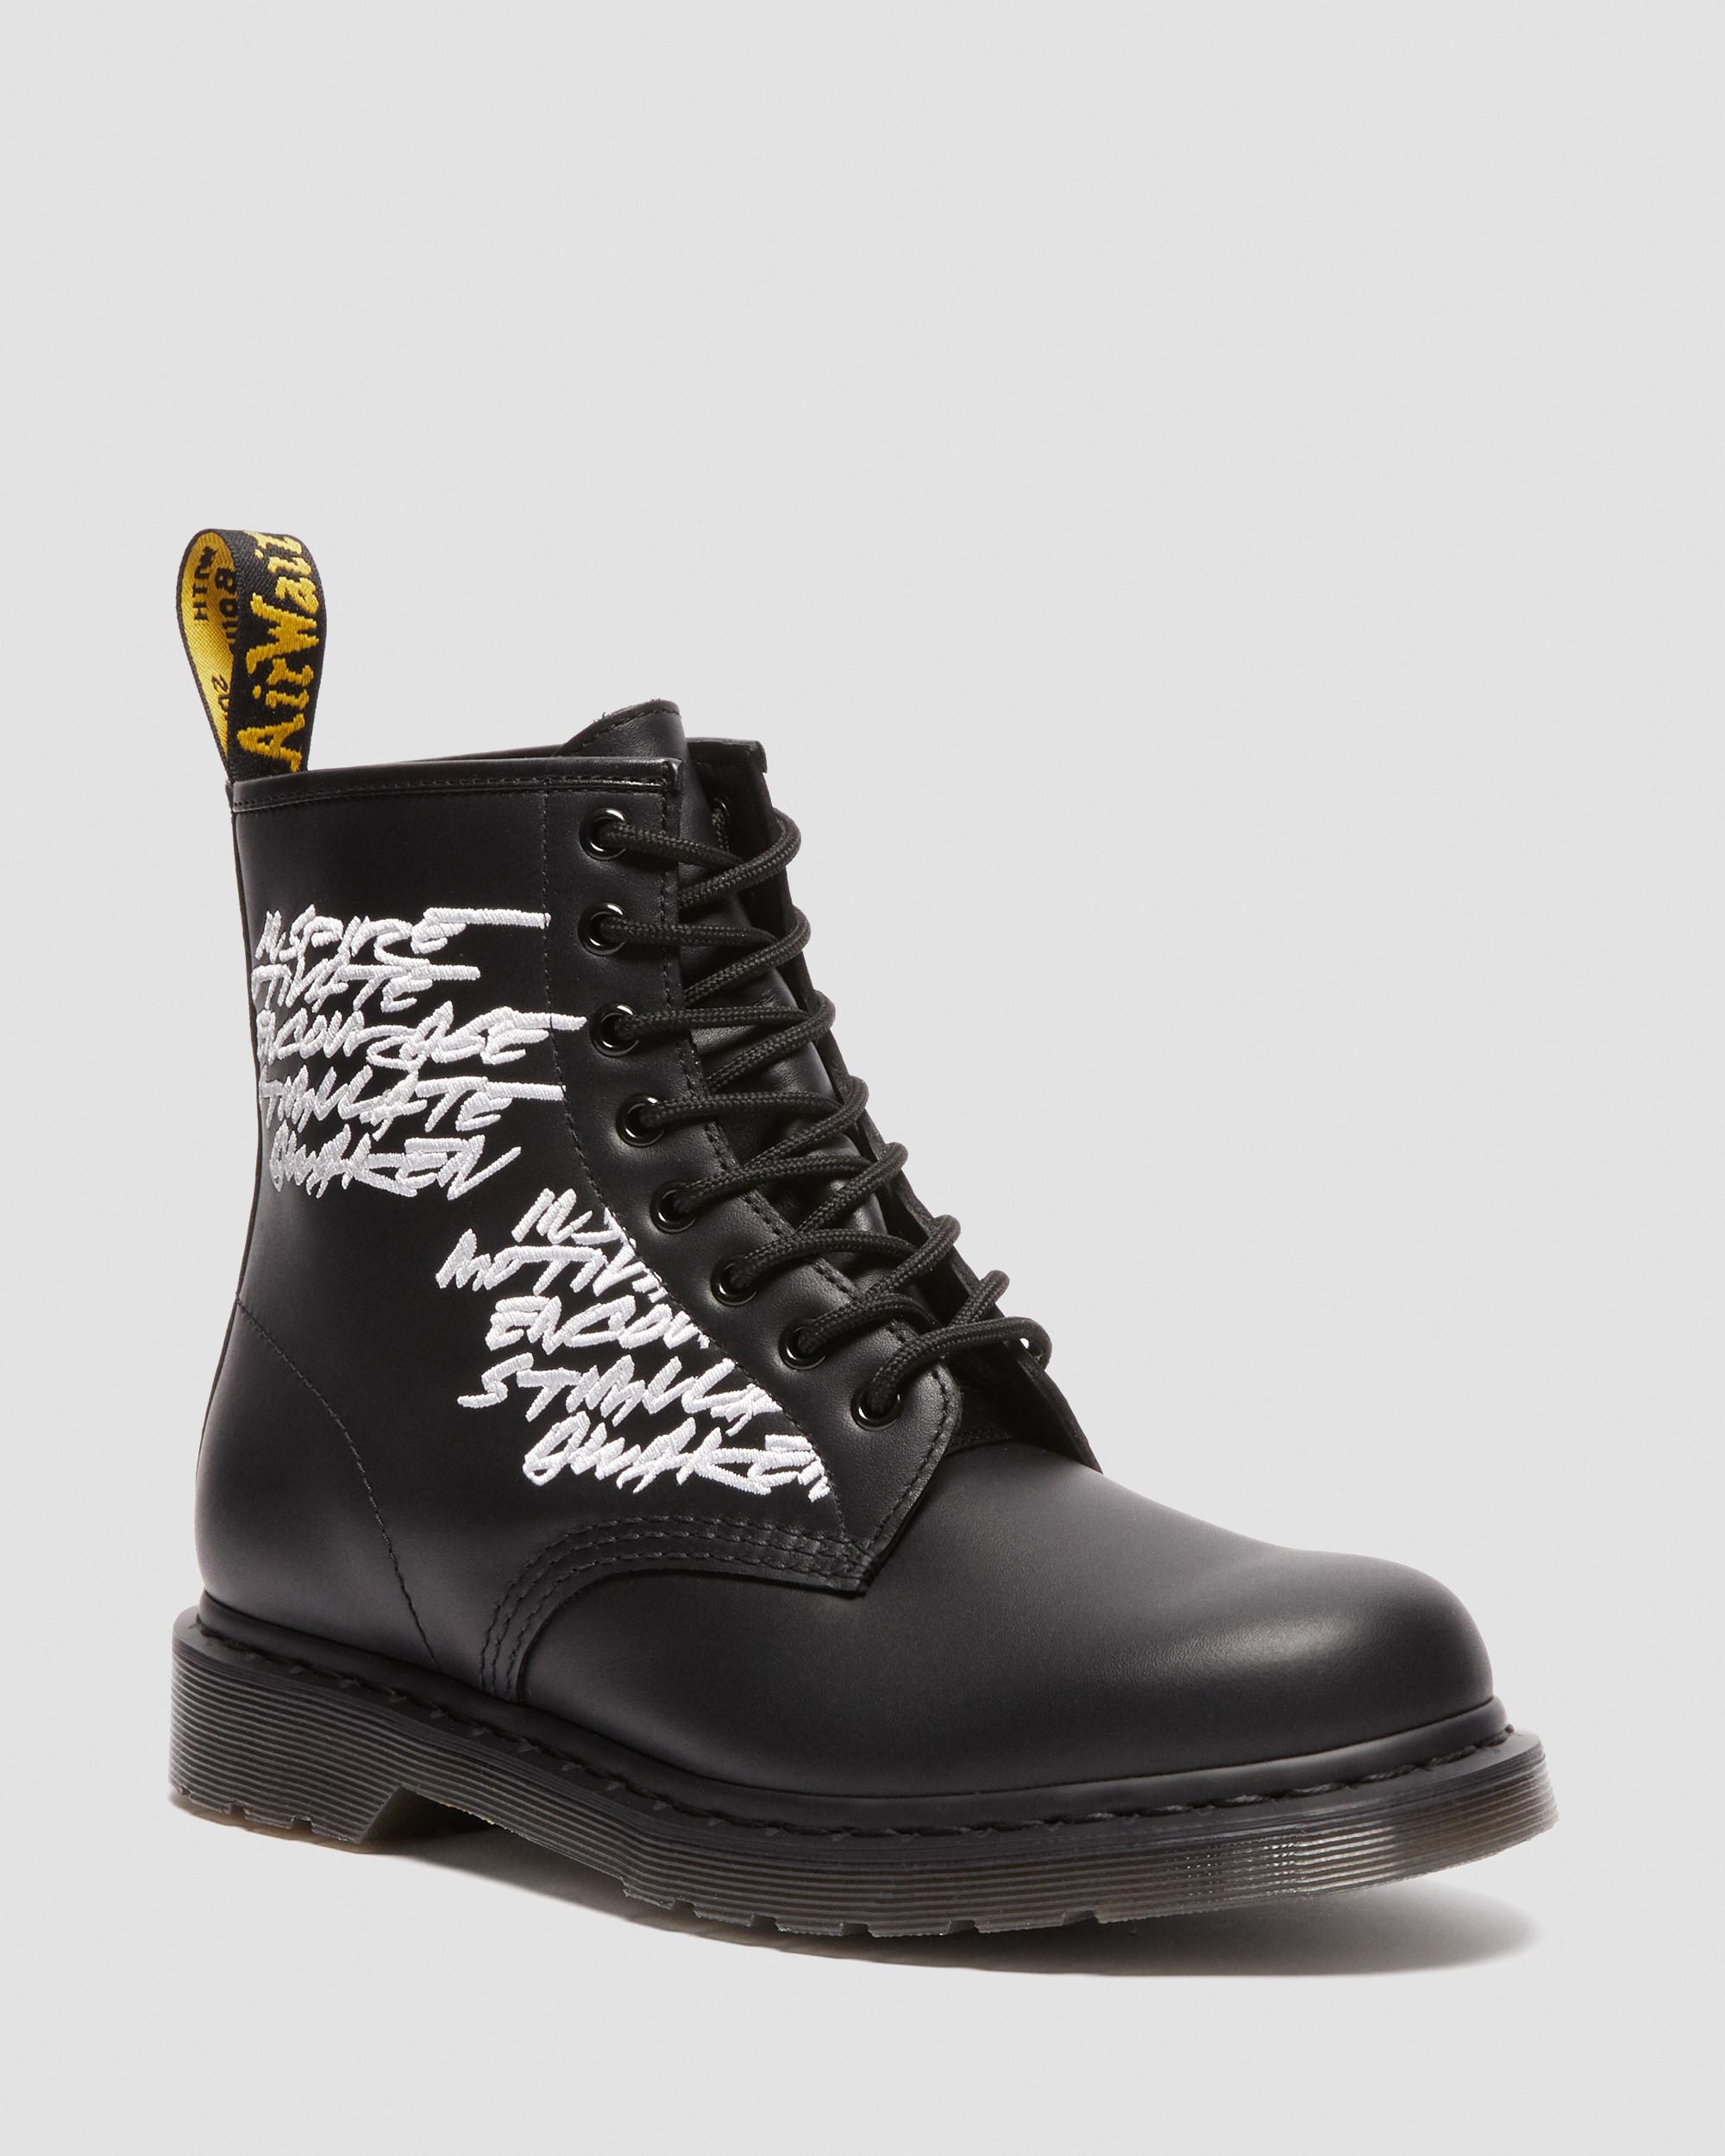 1460 Futura Embroidered Leather Lace Up Boots in Black | Dr. Martens